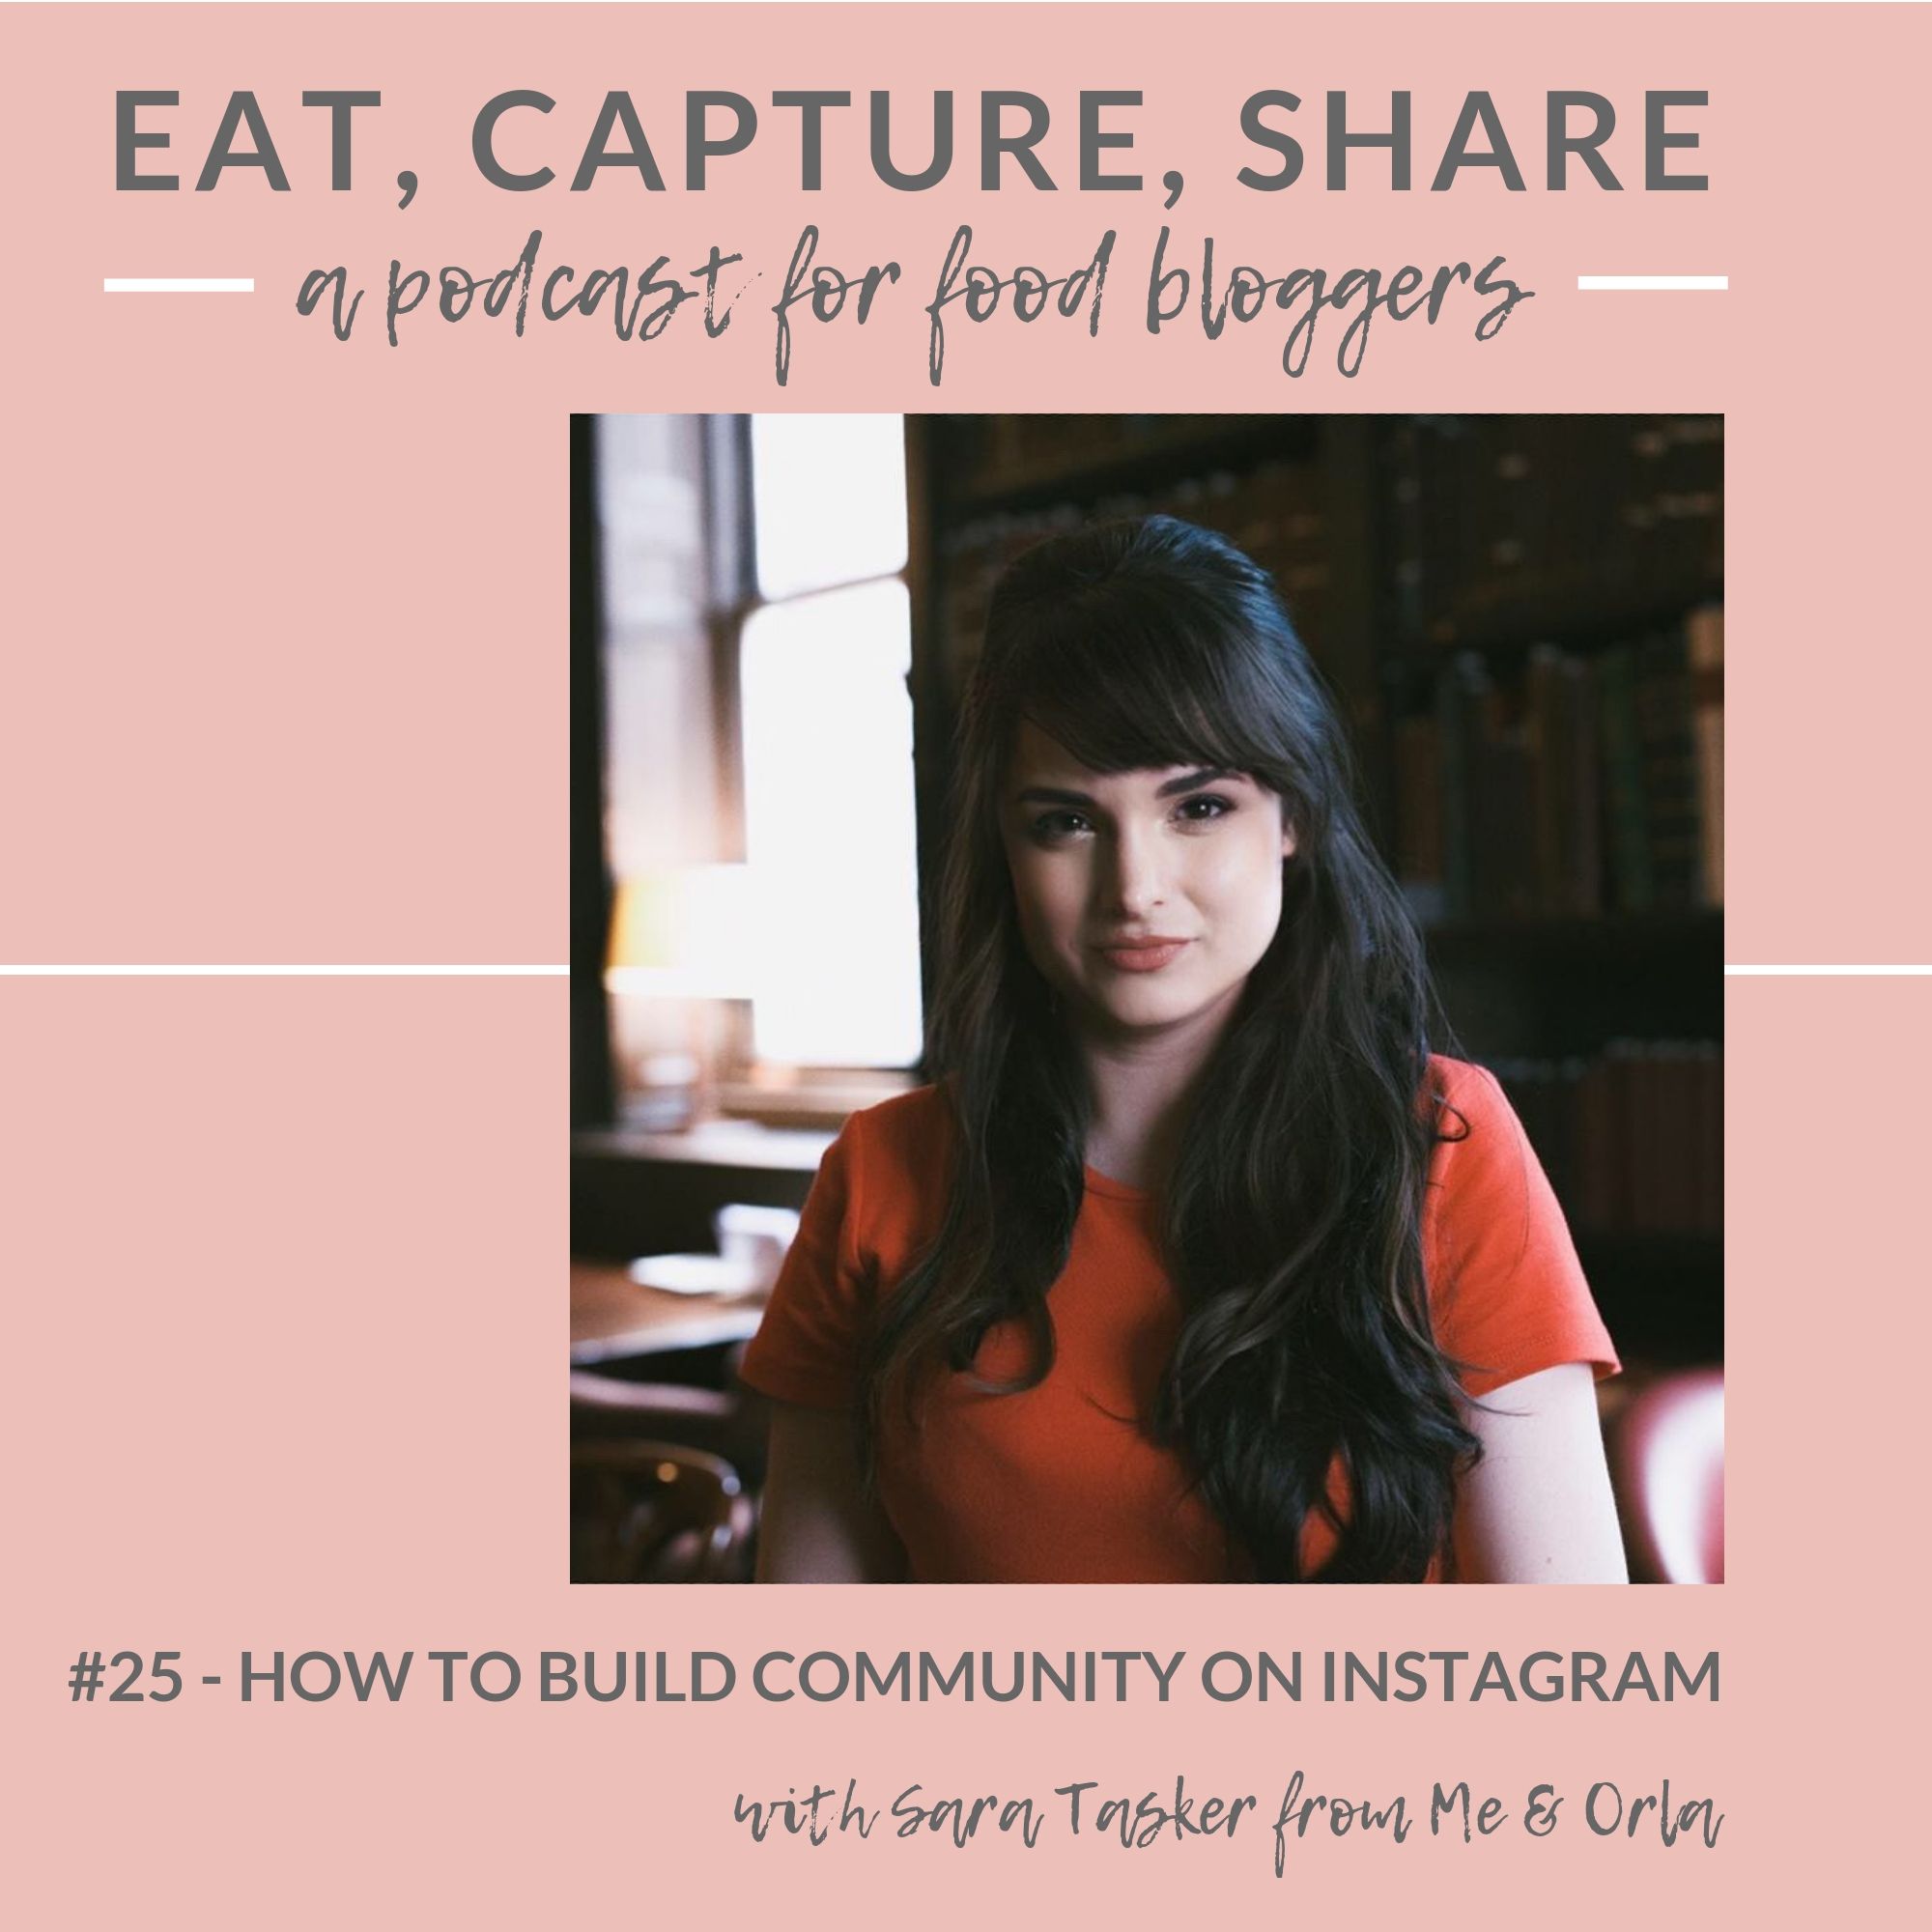 25 - HOW TO BUILD COMMUNITY ON INSTAGRAM WITH SARA TASKER — a vegan food and blog